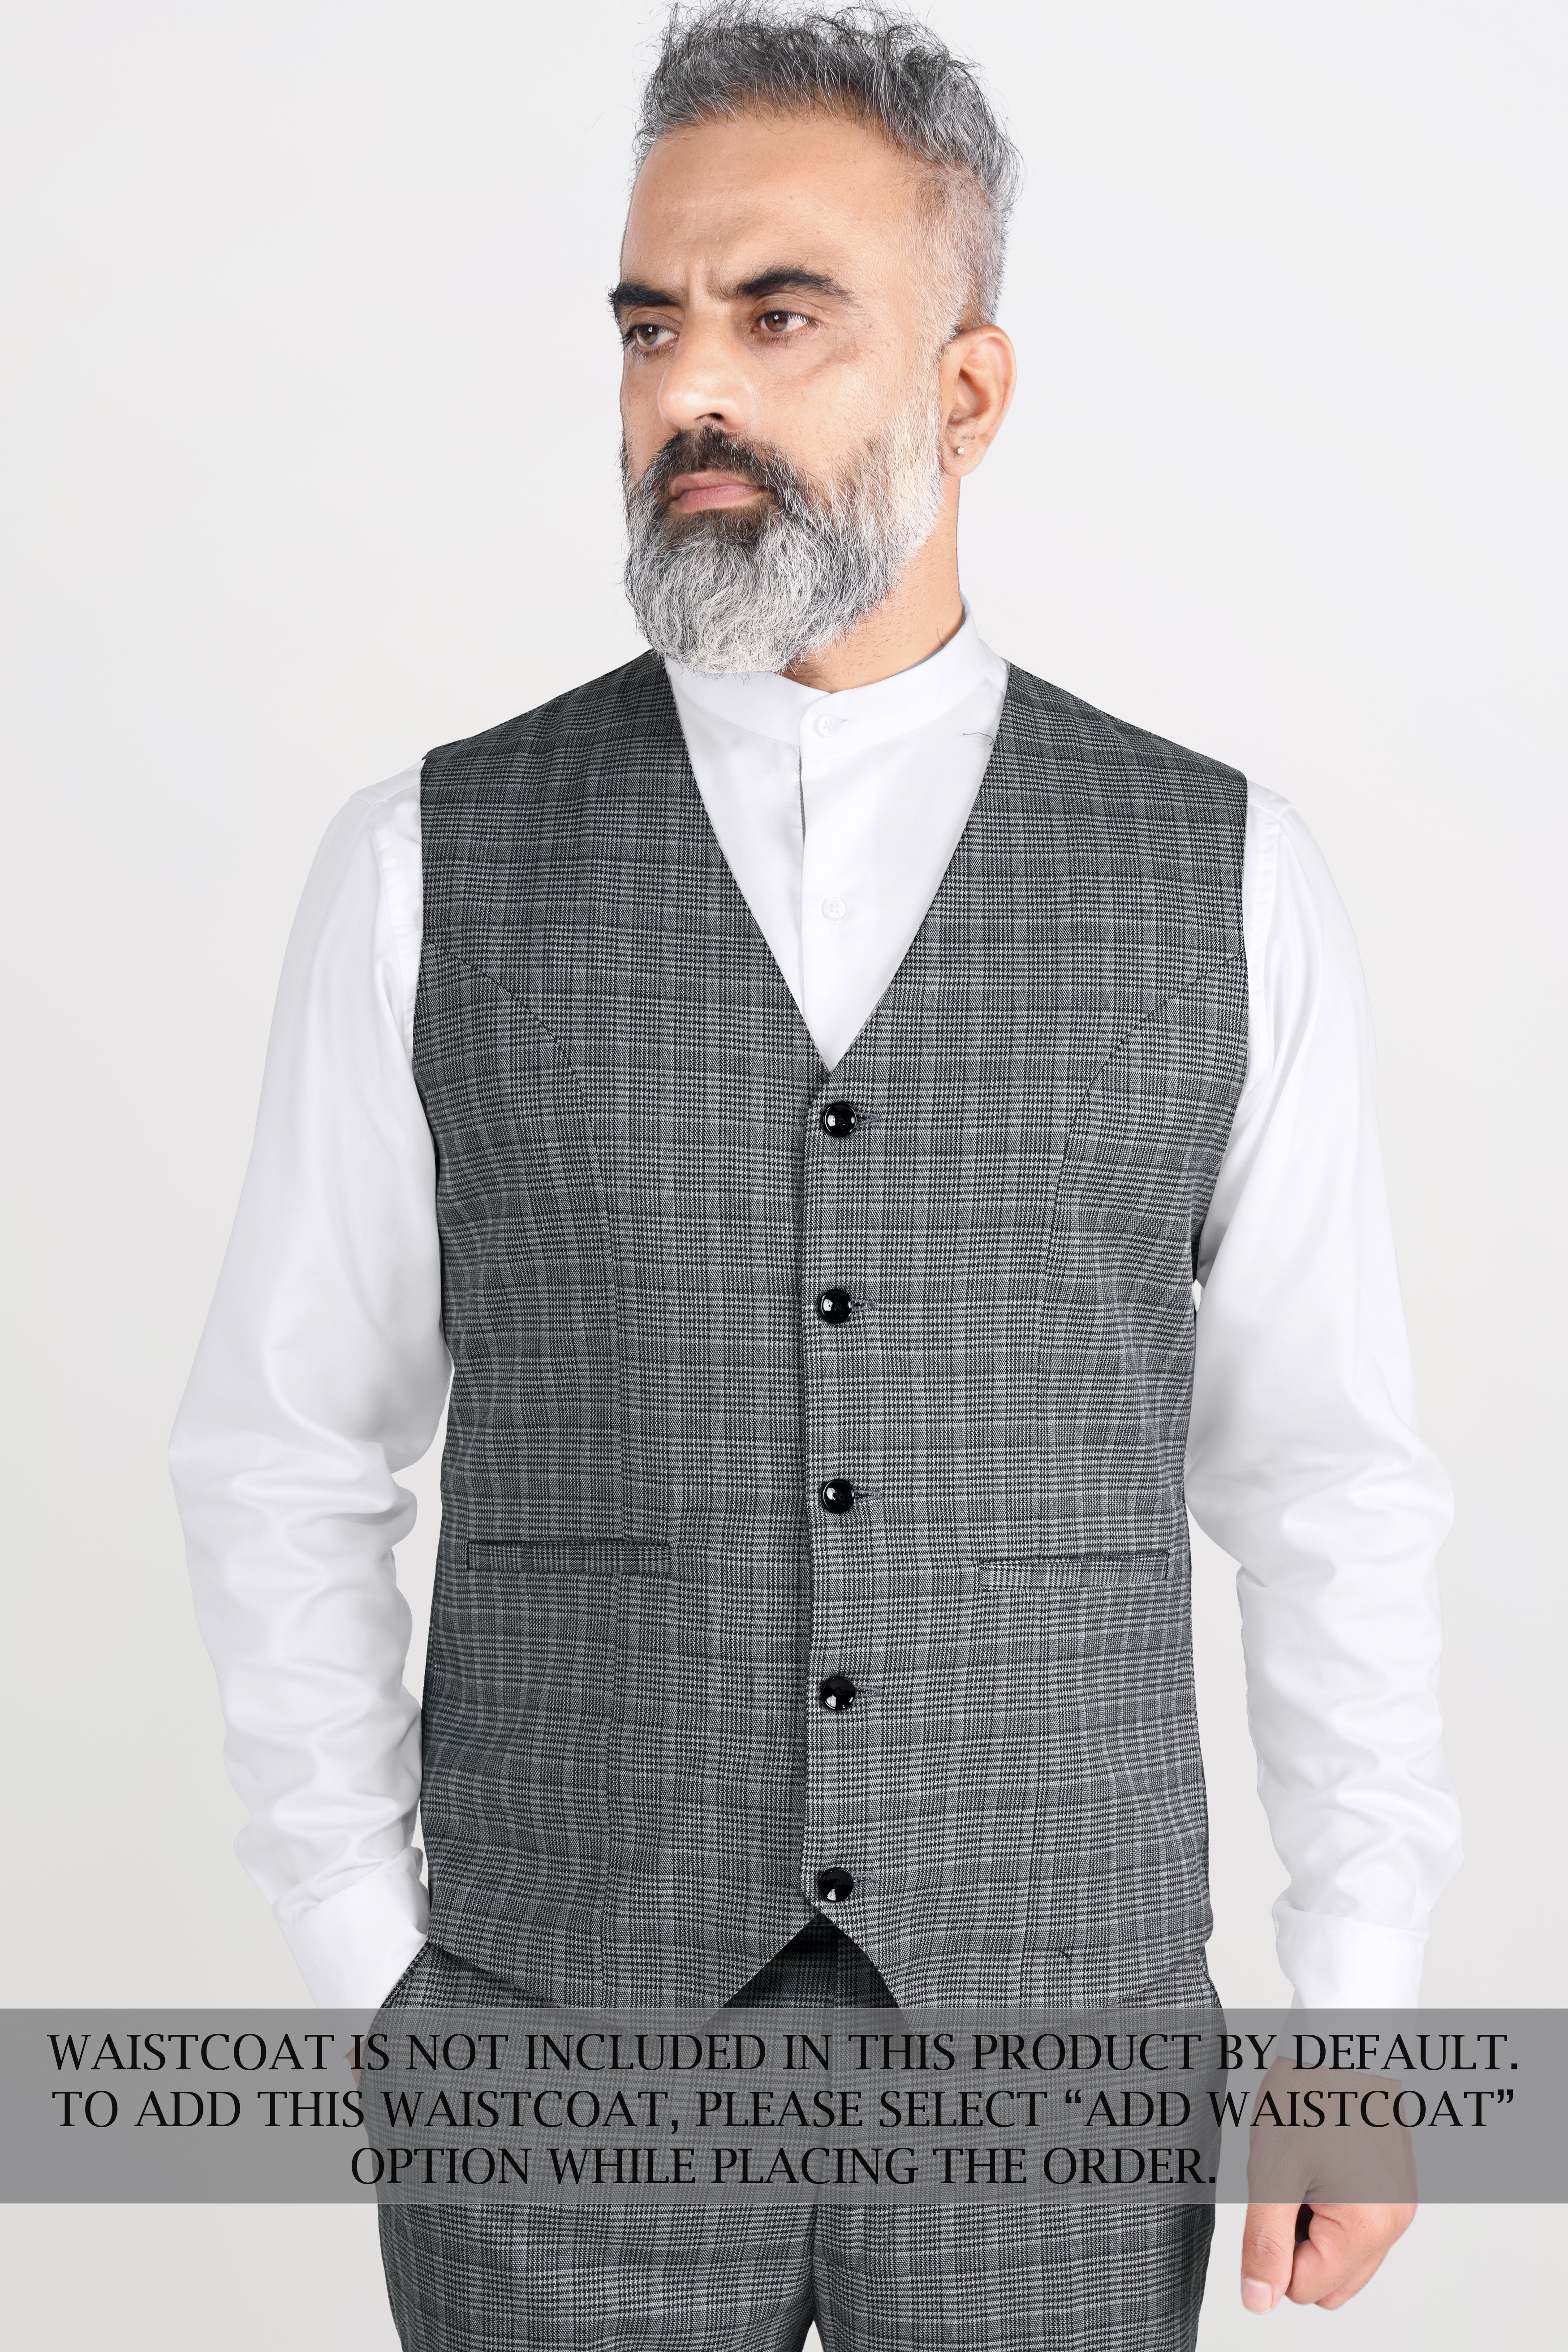 Oslo Gray Checkered Wool Rich Bandhgala Designer Stretchable Traveler Suit ST2801-D38-36,ST2801-D38-38,ST2801-D38-40,ST2801-D38-42,ST2801-D38-44,ST2801-D38-46,ST2801-D38-48,ST2801-D38-50,ST2801-D38-52,ST2801-D38-54,ST2801-D38-56,ST2801-D38-58,ST2801-D38-60